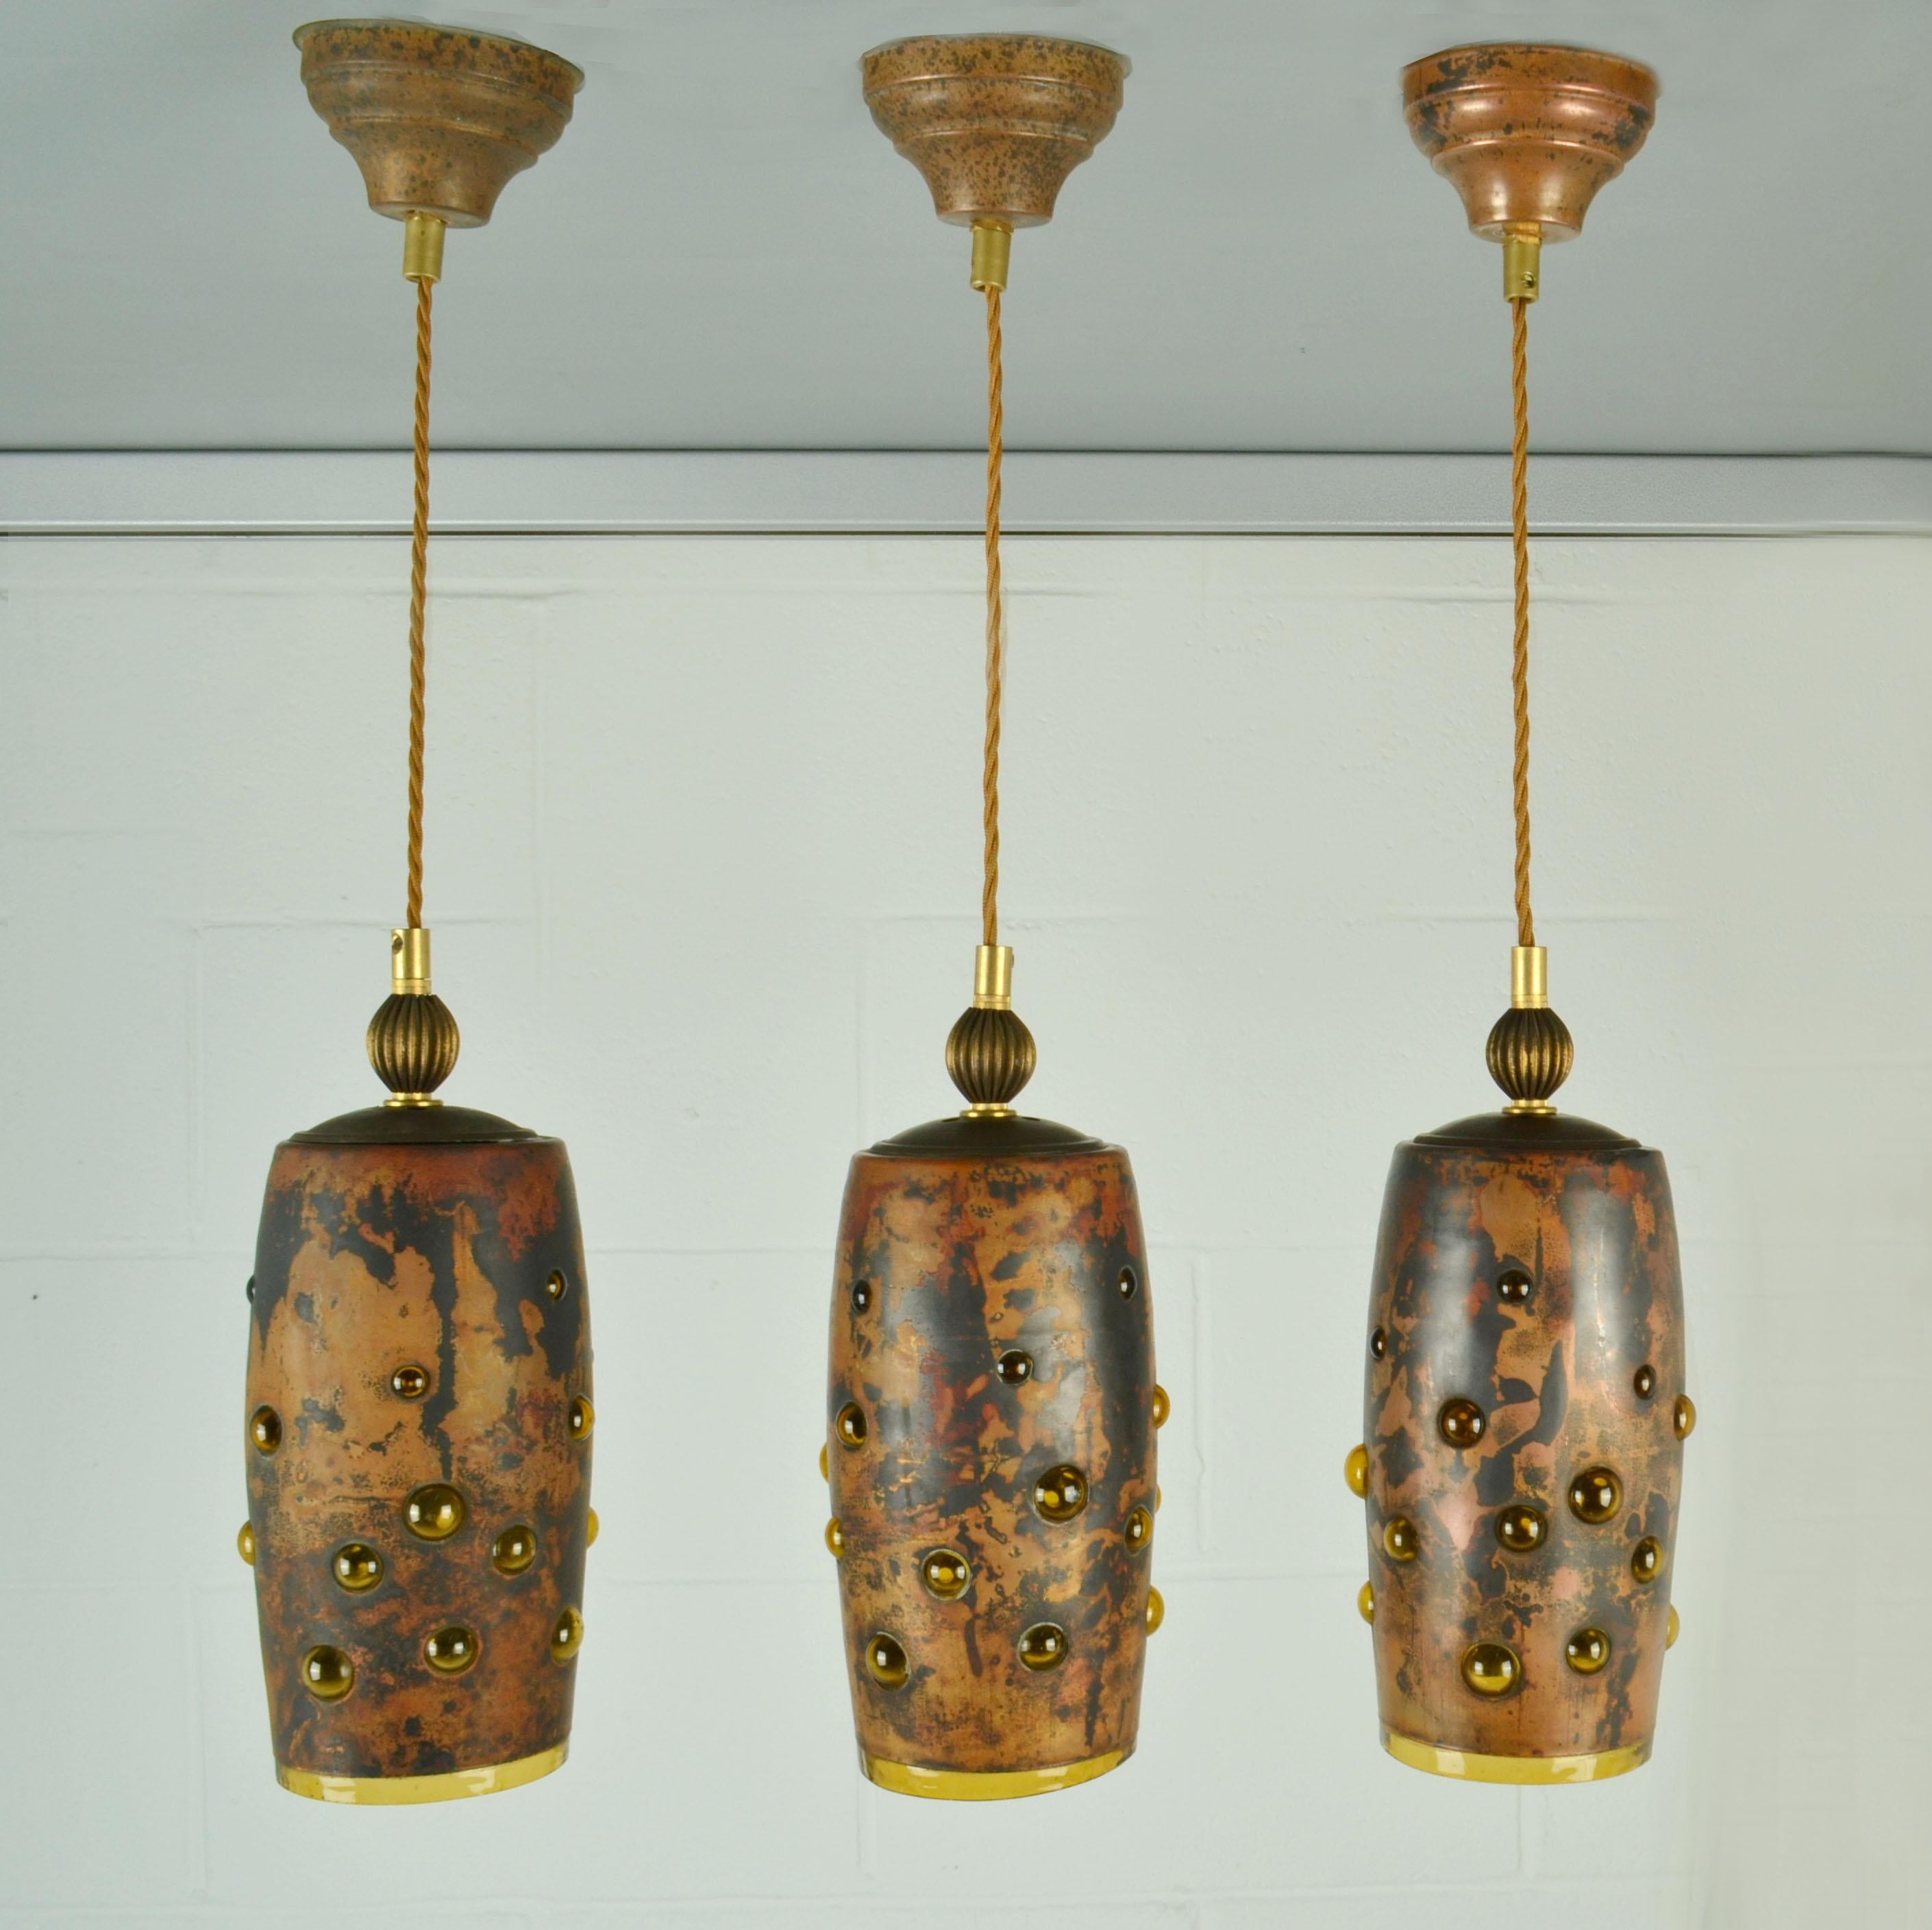 Set of Tree amber glass pendant lamps made from blown glass & oxidized copper. They are all unique in execution. The deep amber expanded glass is blown with regularity into external patinated copper spherical frames. The mix of metal and trapped